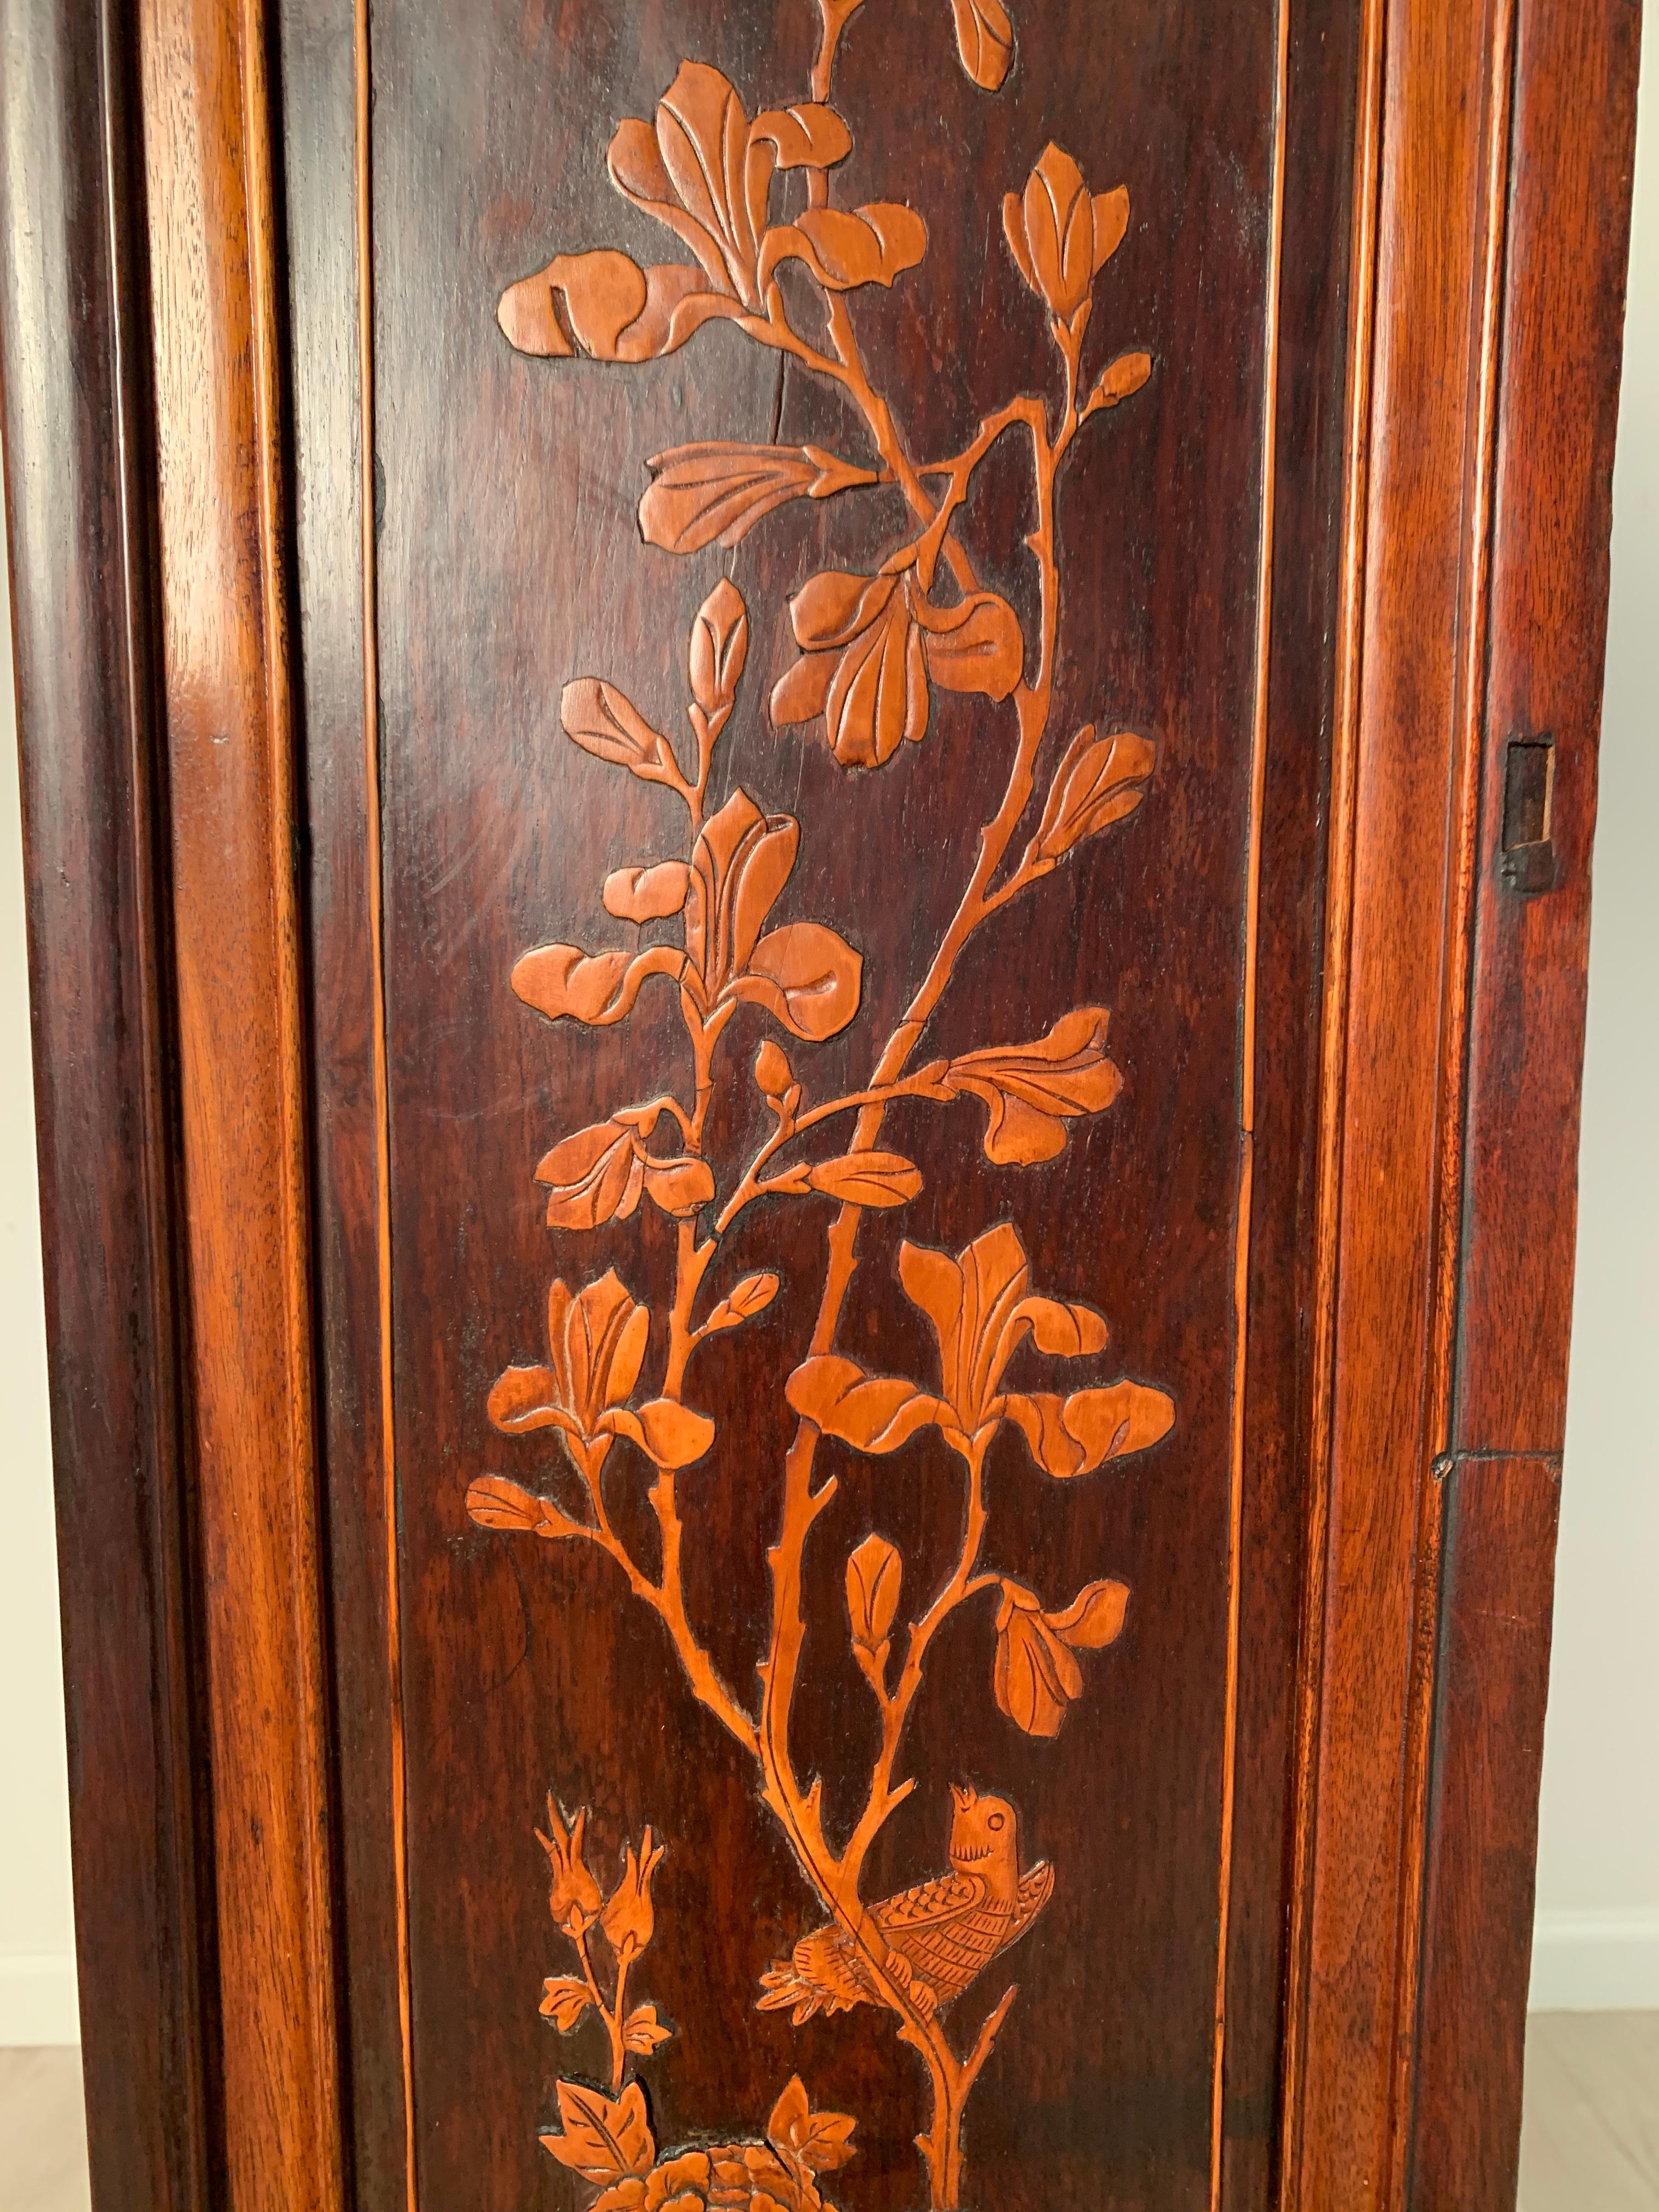 Chinese Peranakan Inlaid Hardwood Pagoda Display Cabinet, Early 20th Century For Sale 6